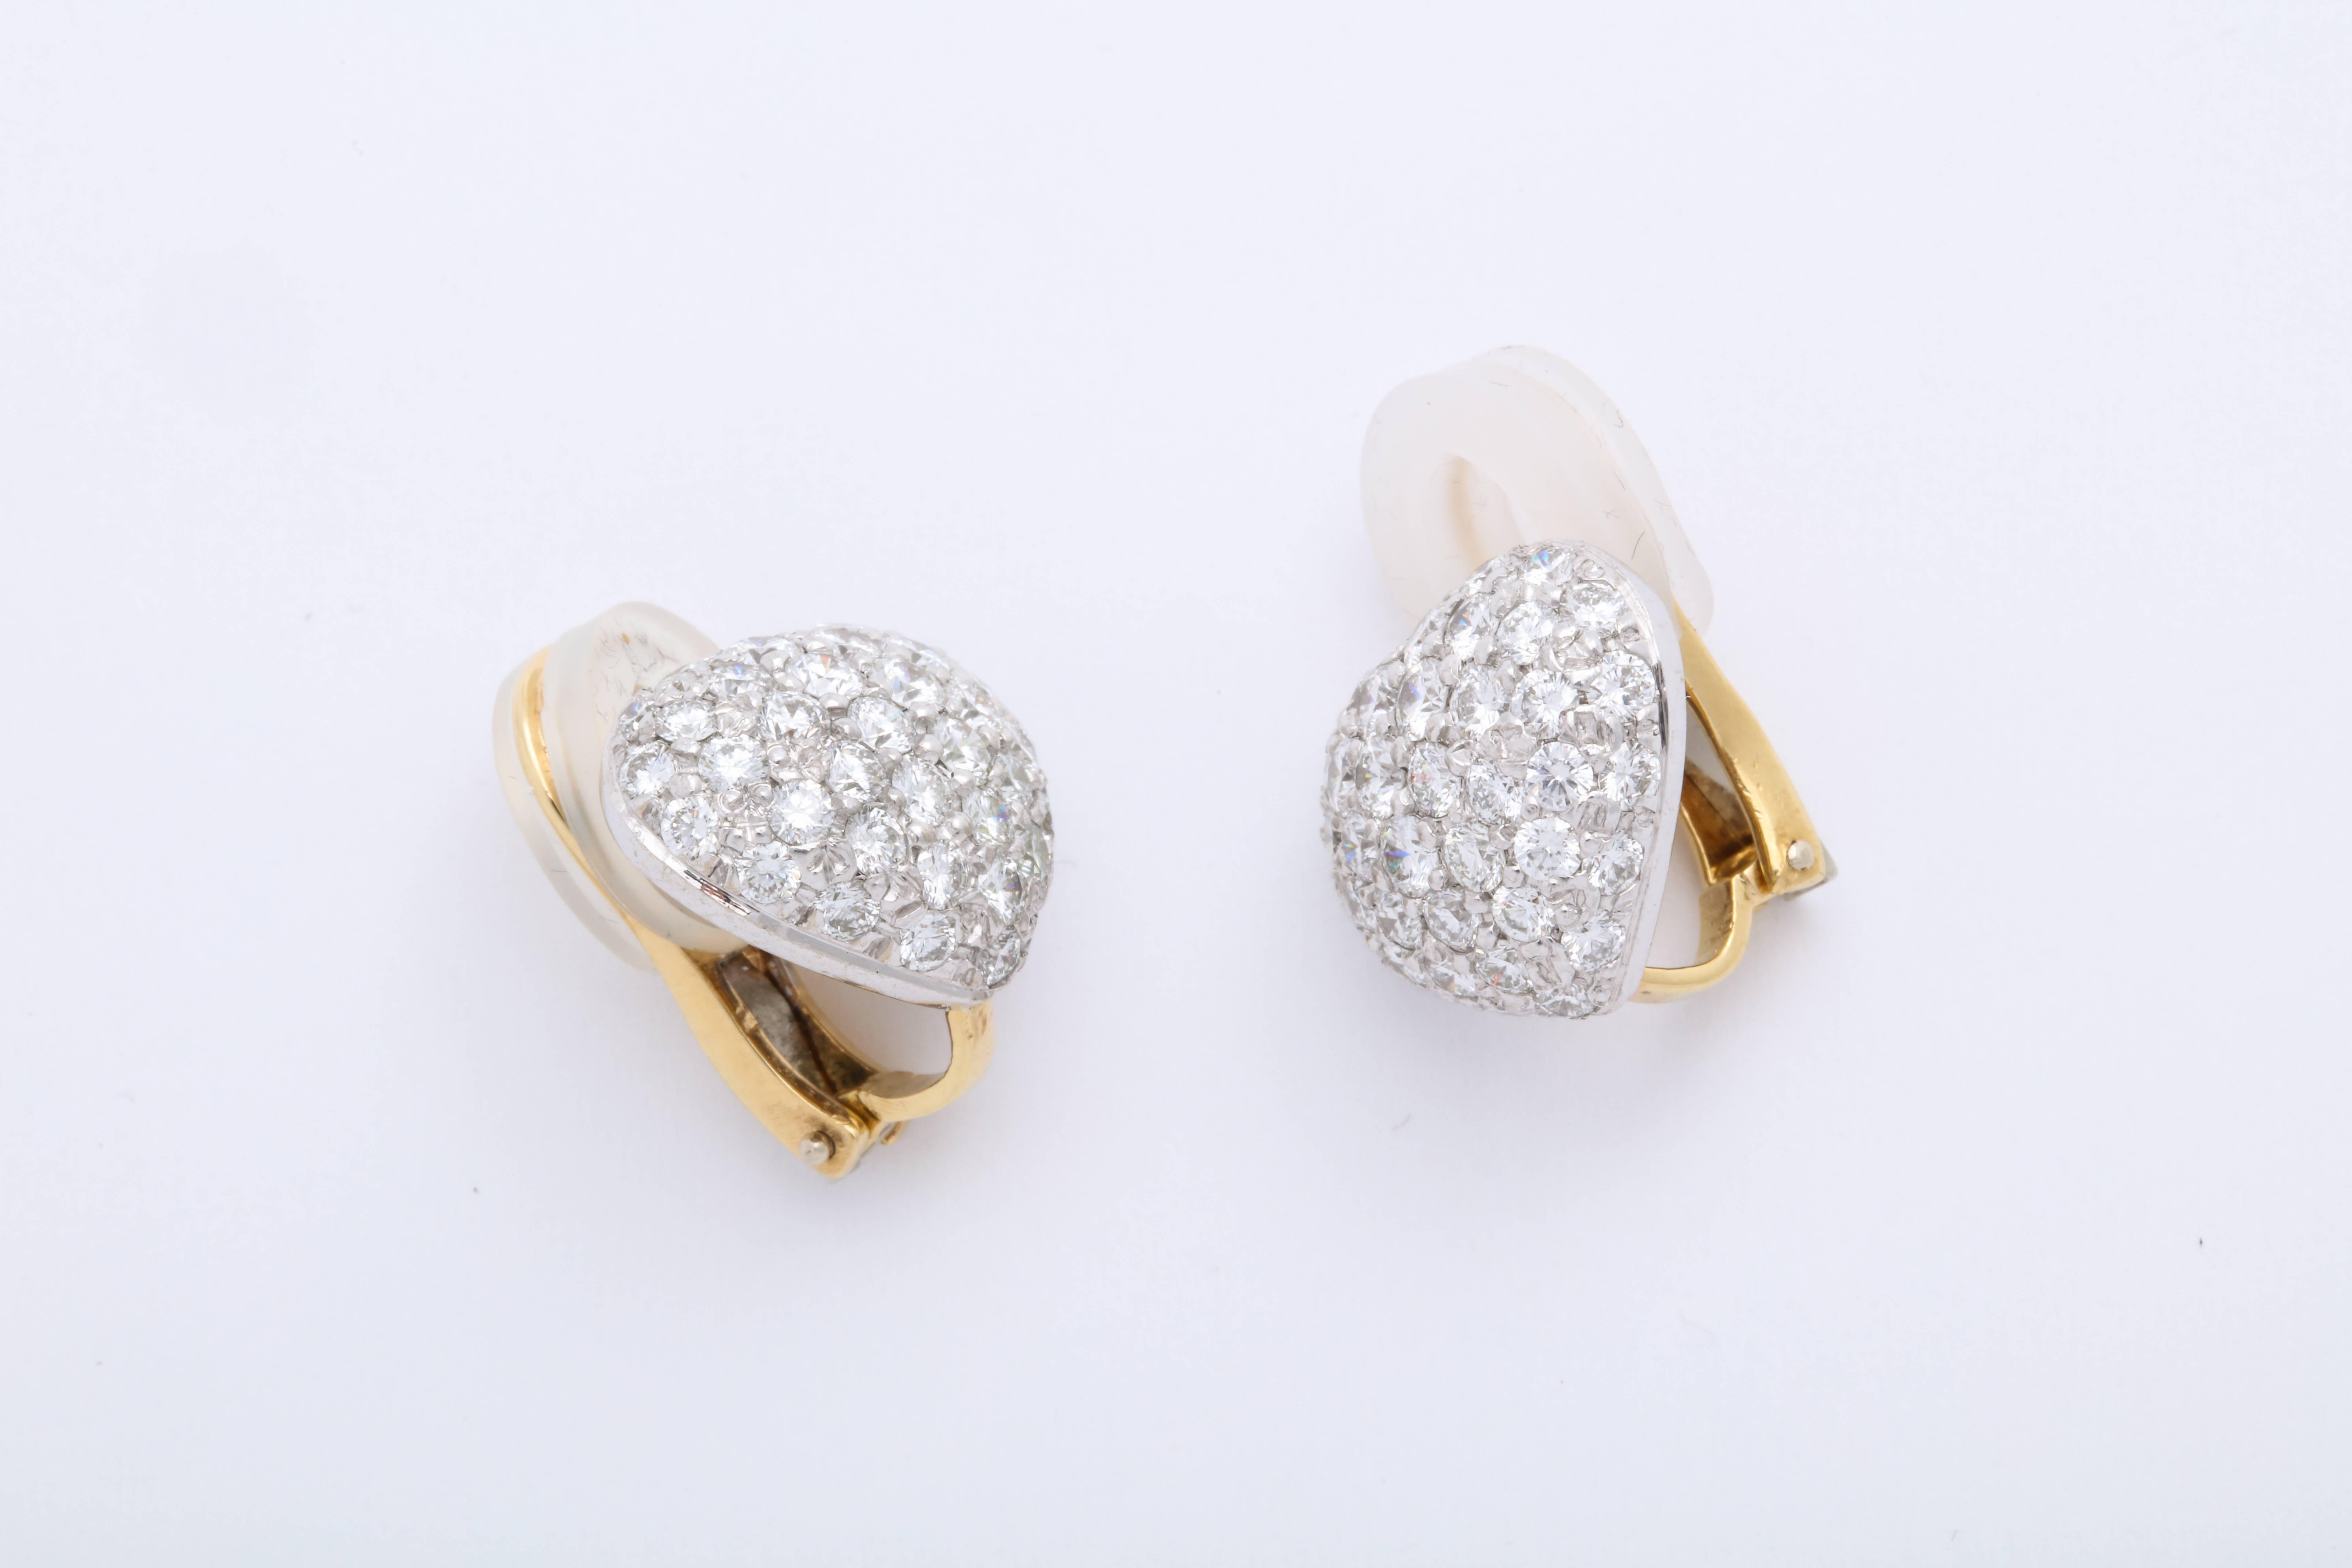 earrings in white and yellow 18 kt gold with colorless diamonds